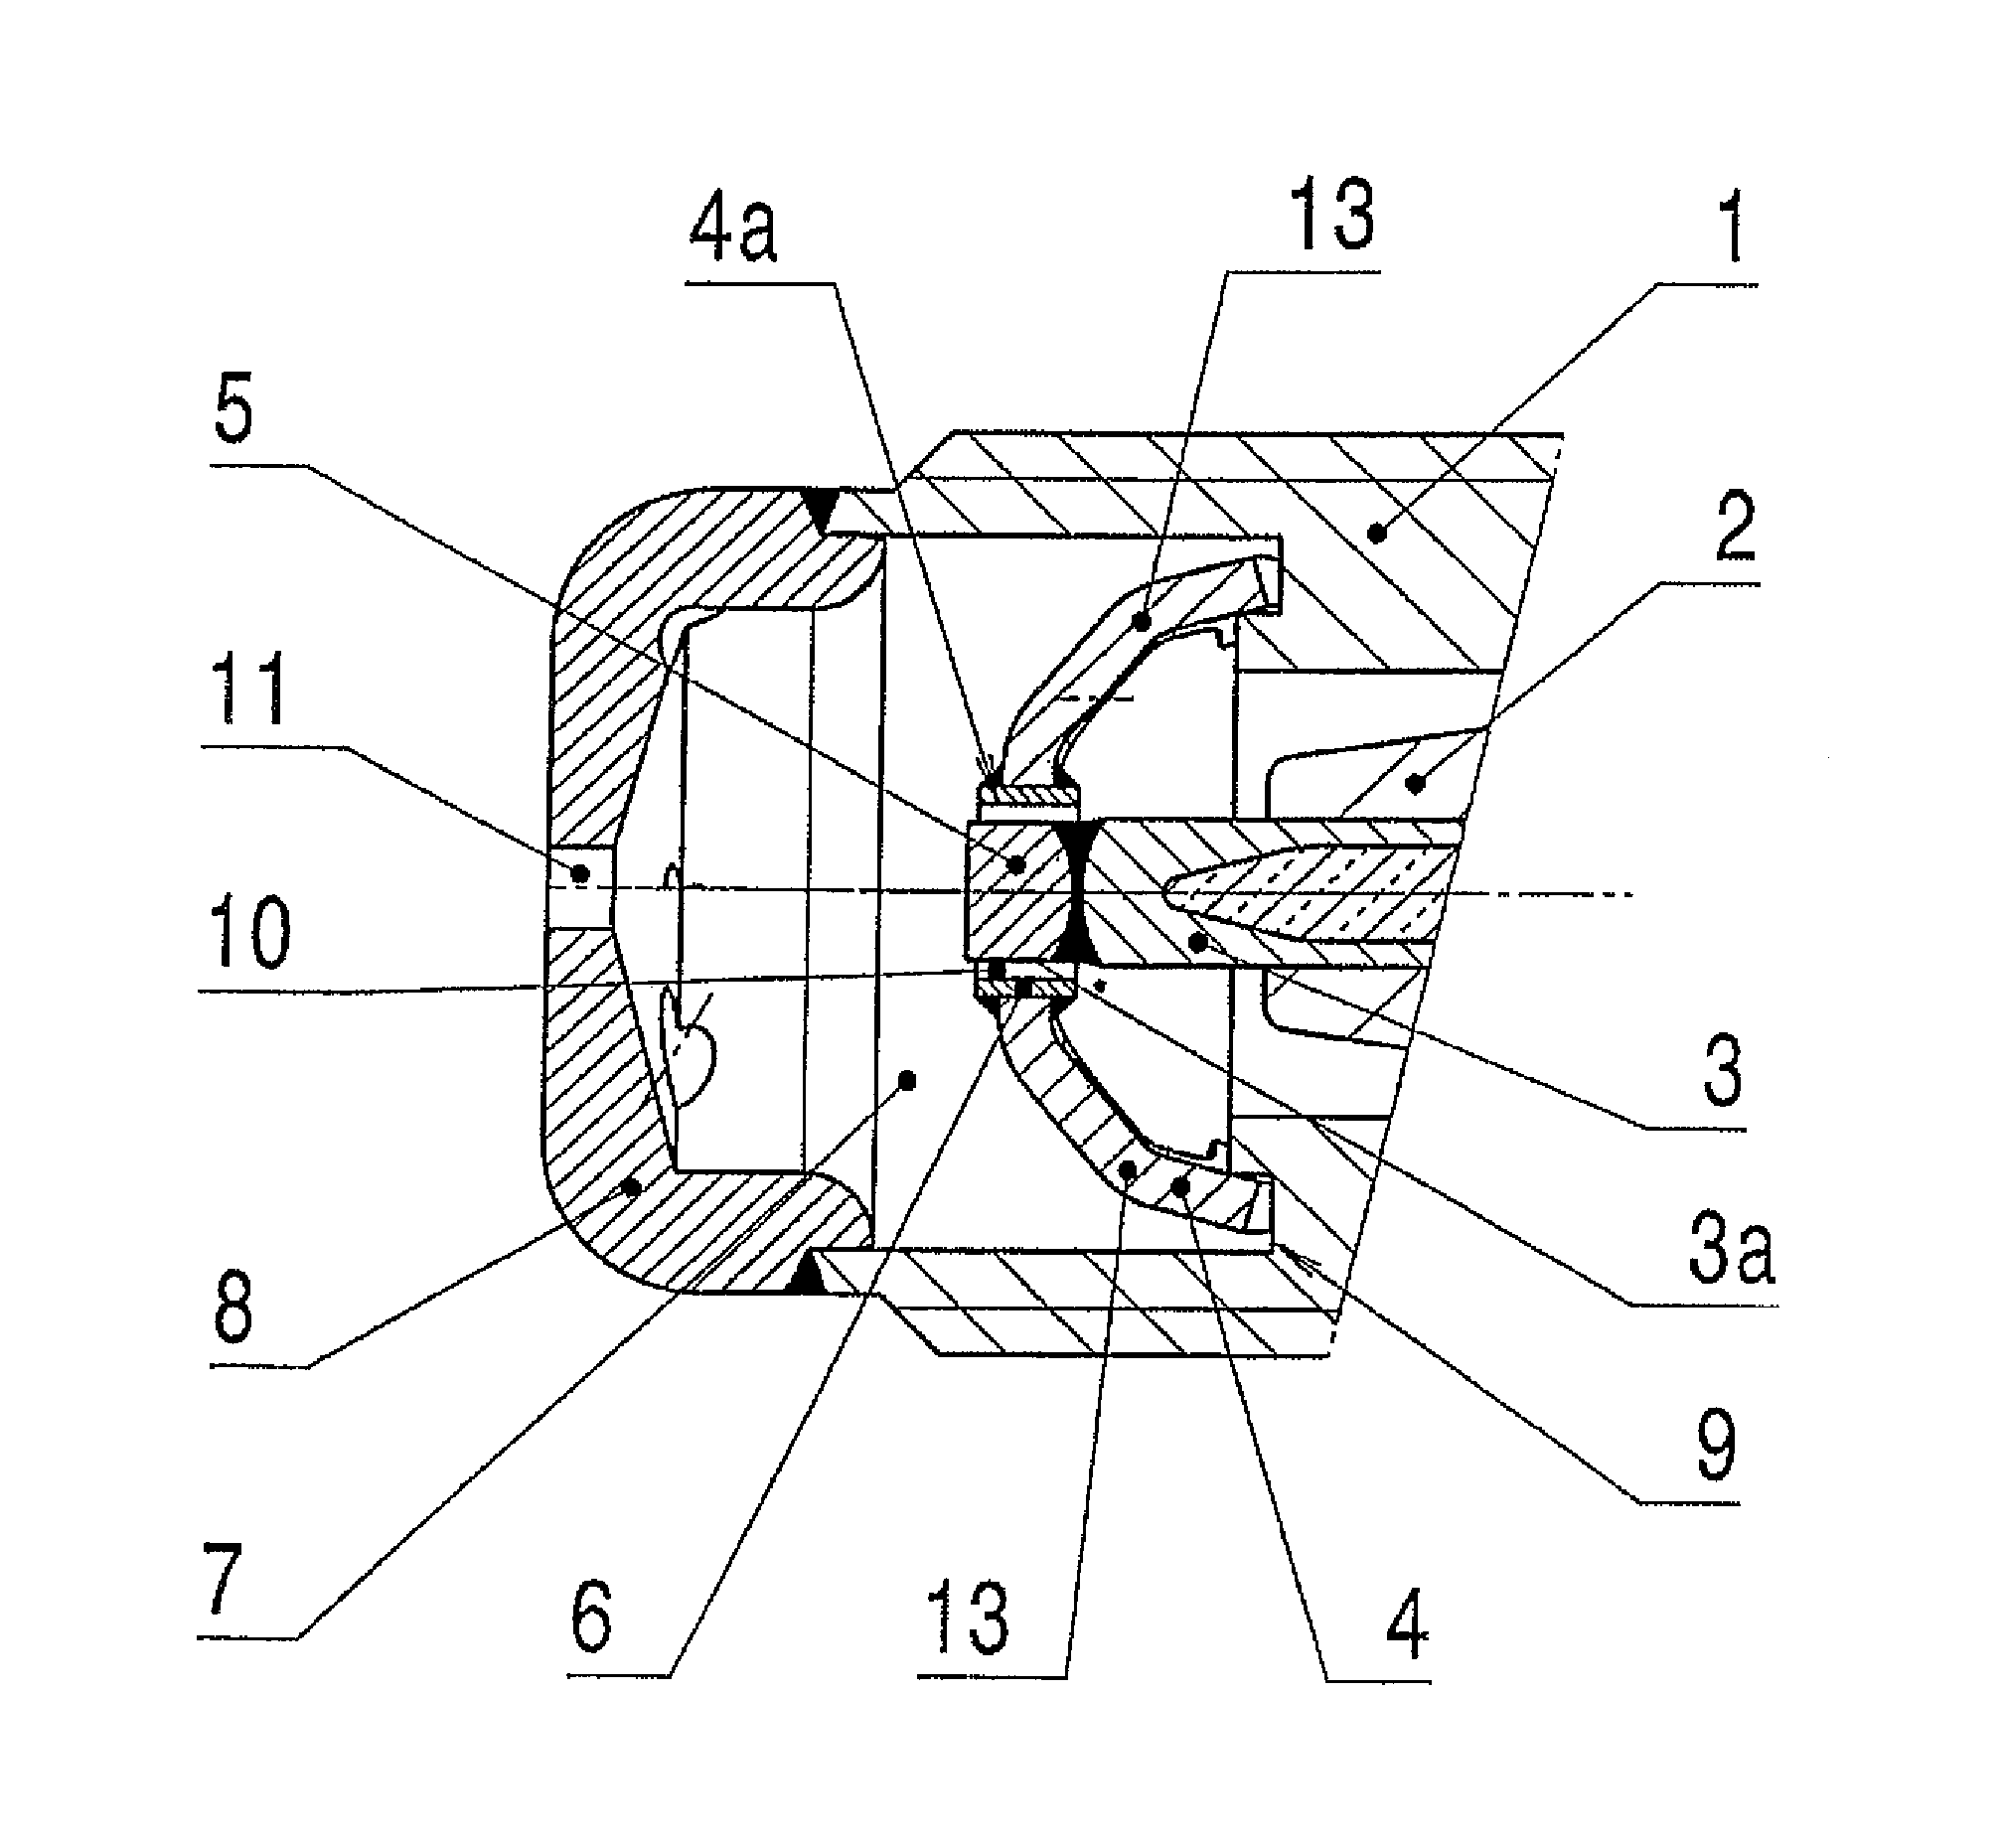 Spark plug for a gas-operated internal combustion engine